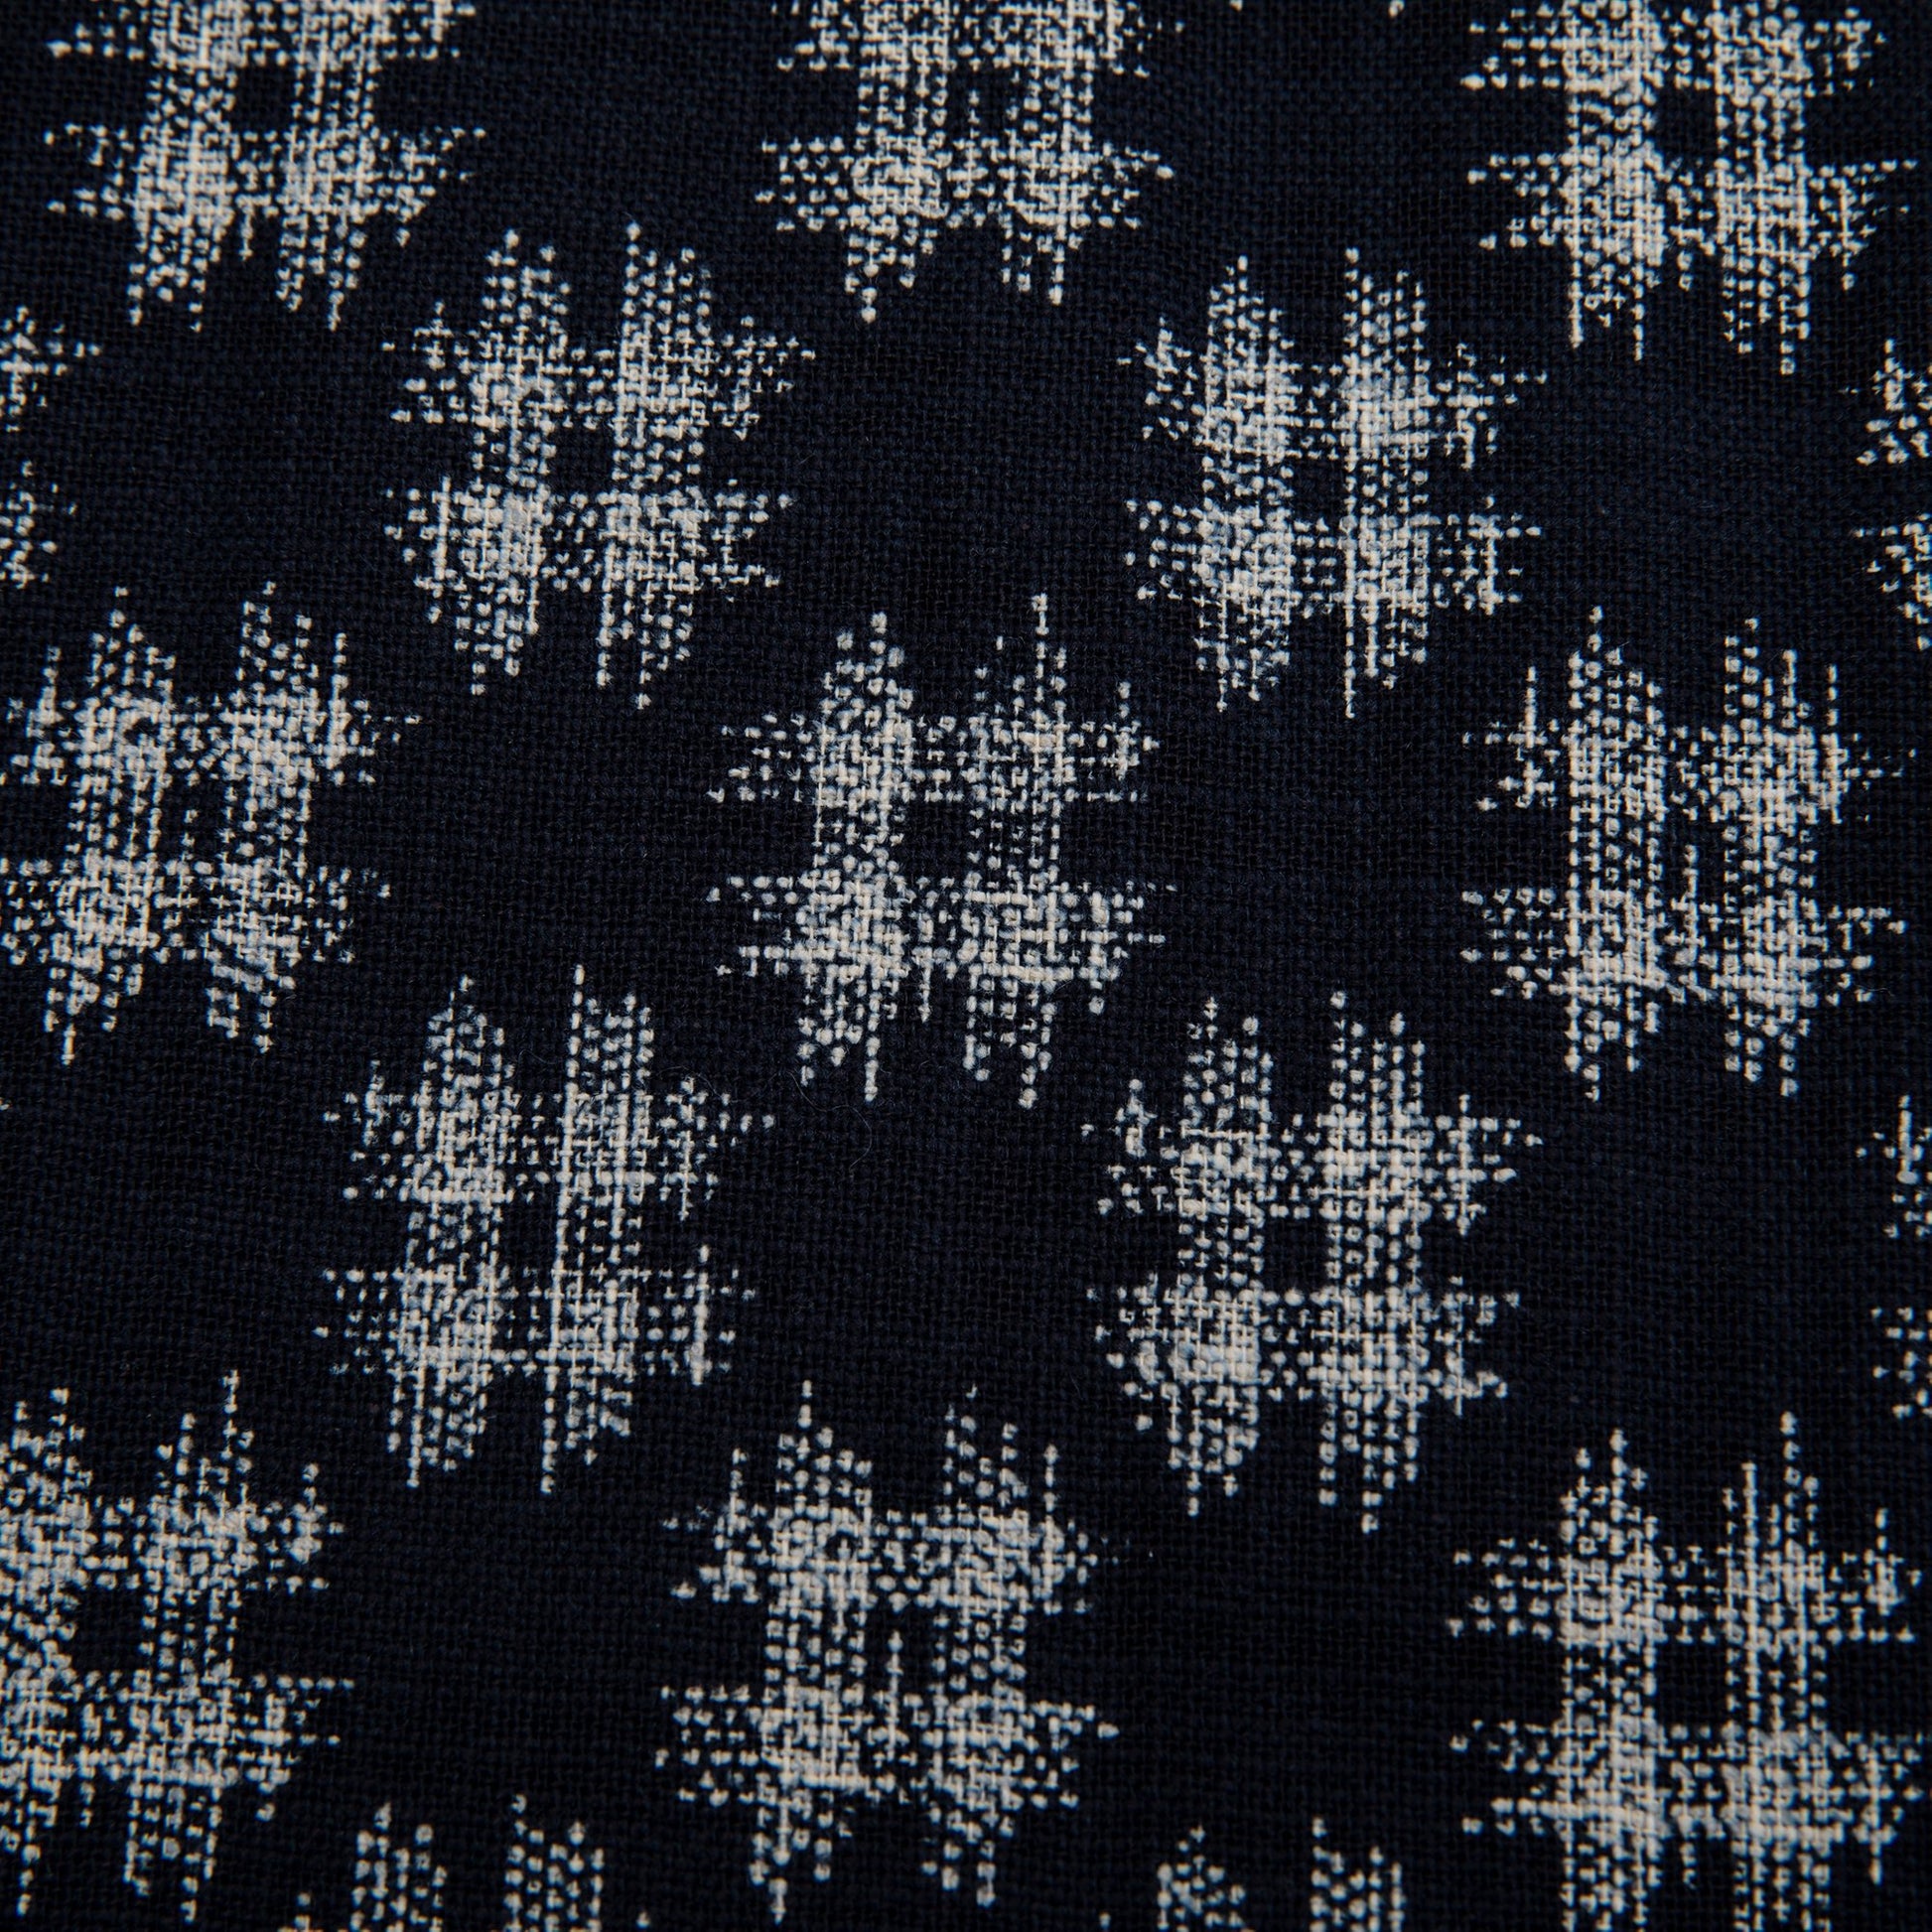 Imported Japanese Fabric - Hiro Navy_Fabric_Imported from Japan_100% Cotton_Japanese Sleep System